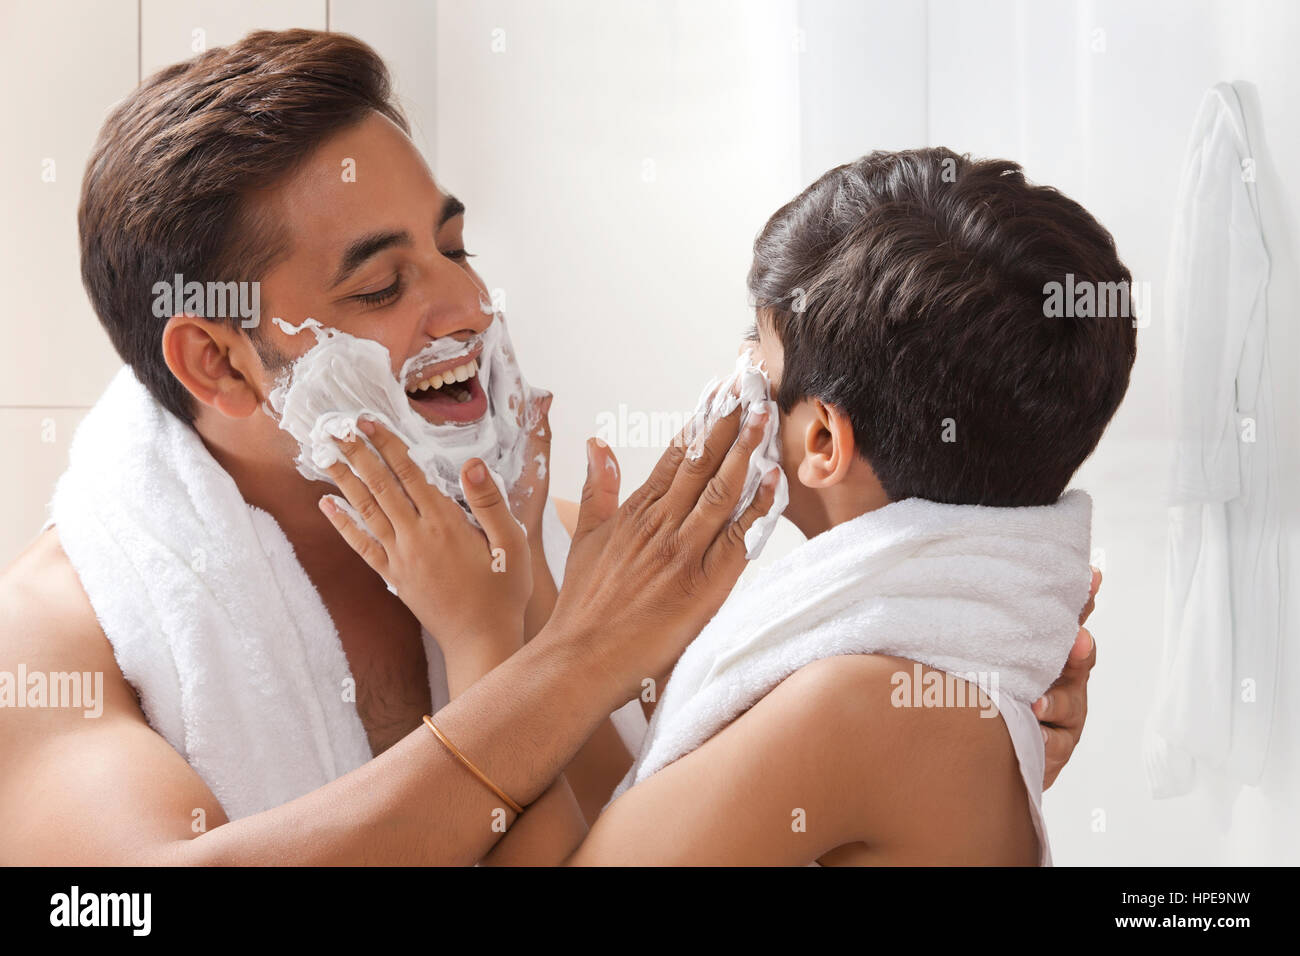 Father and son acting as super heroes Stock Photo